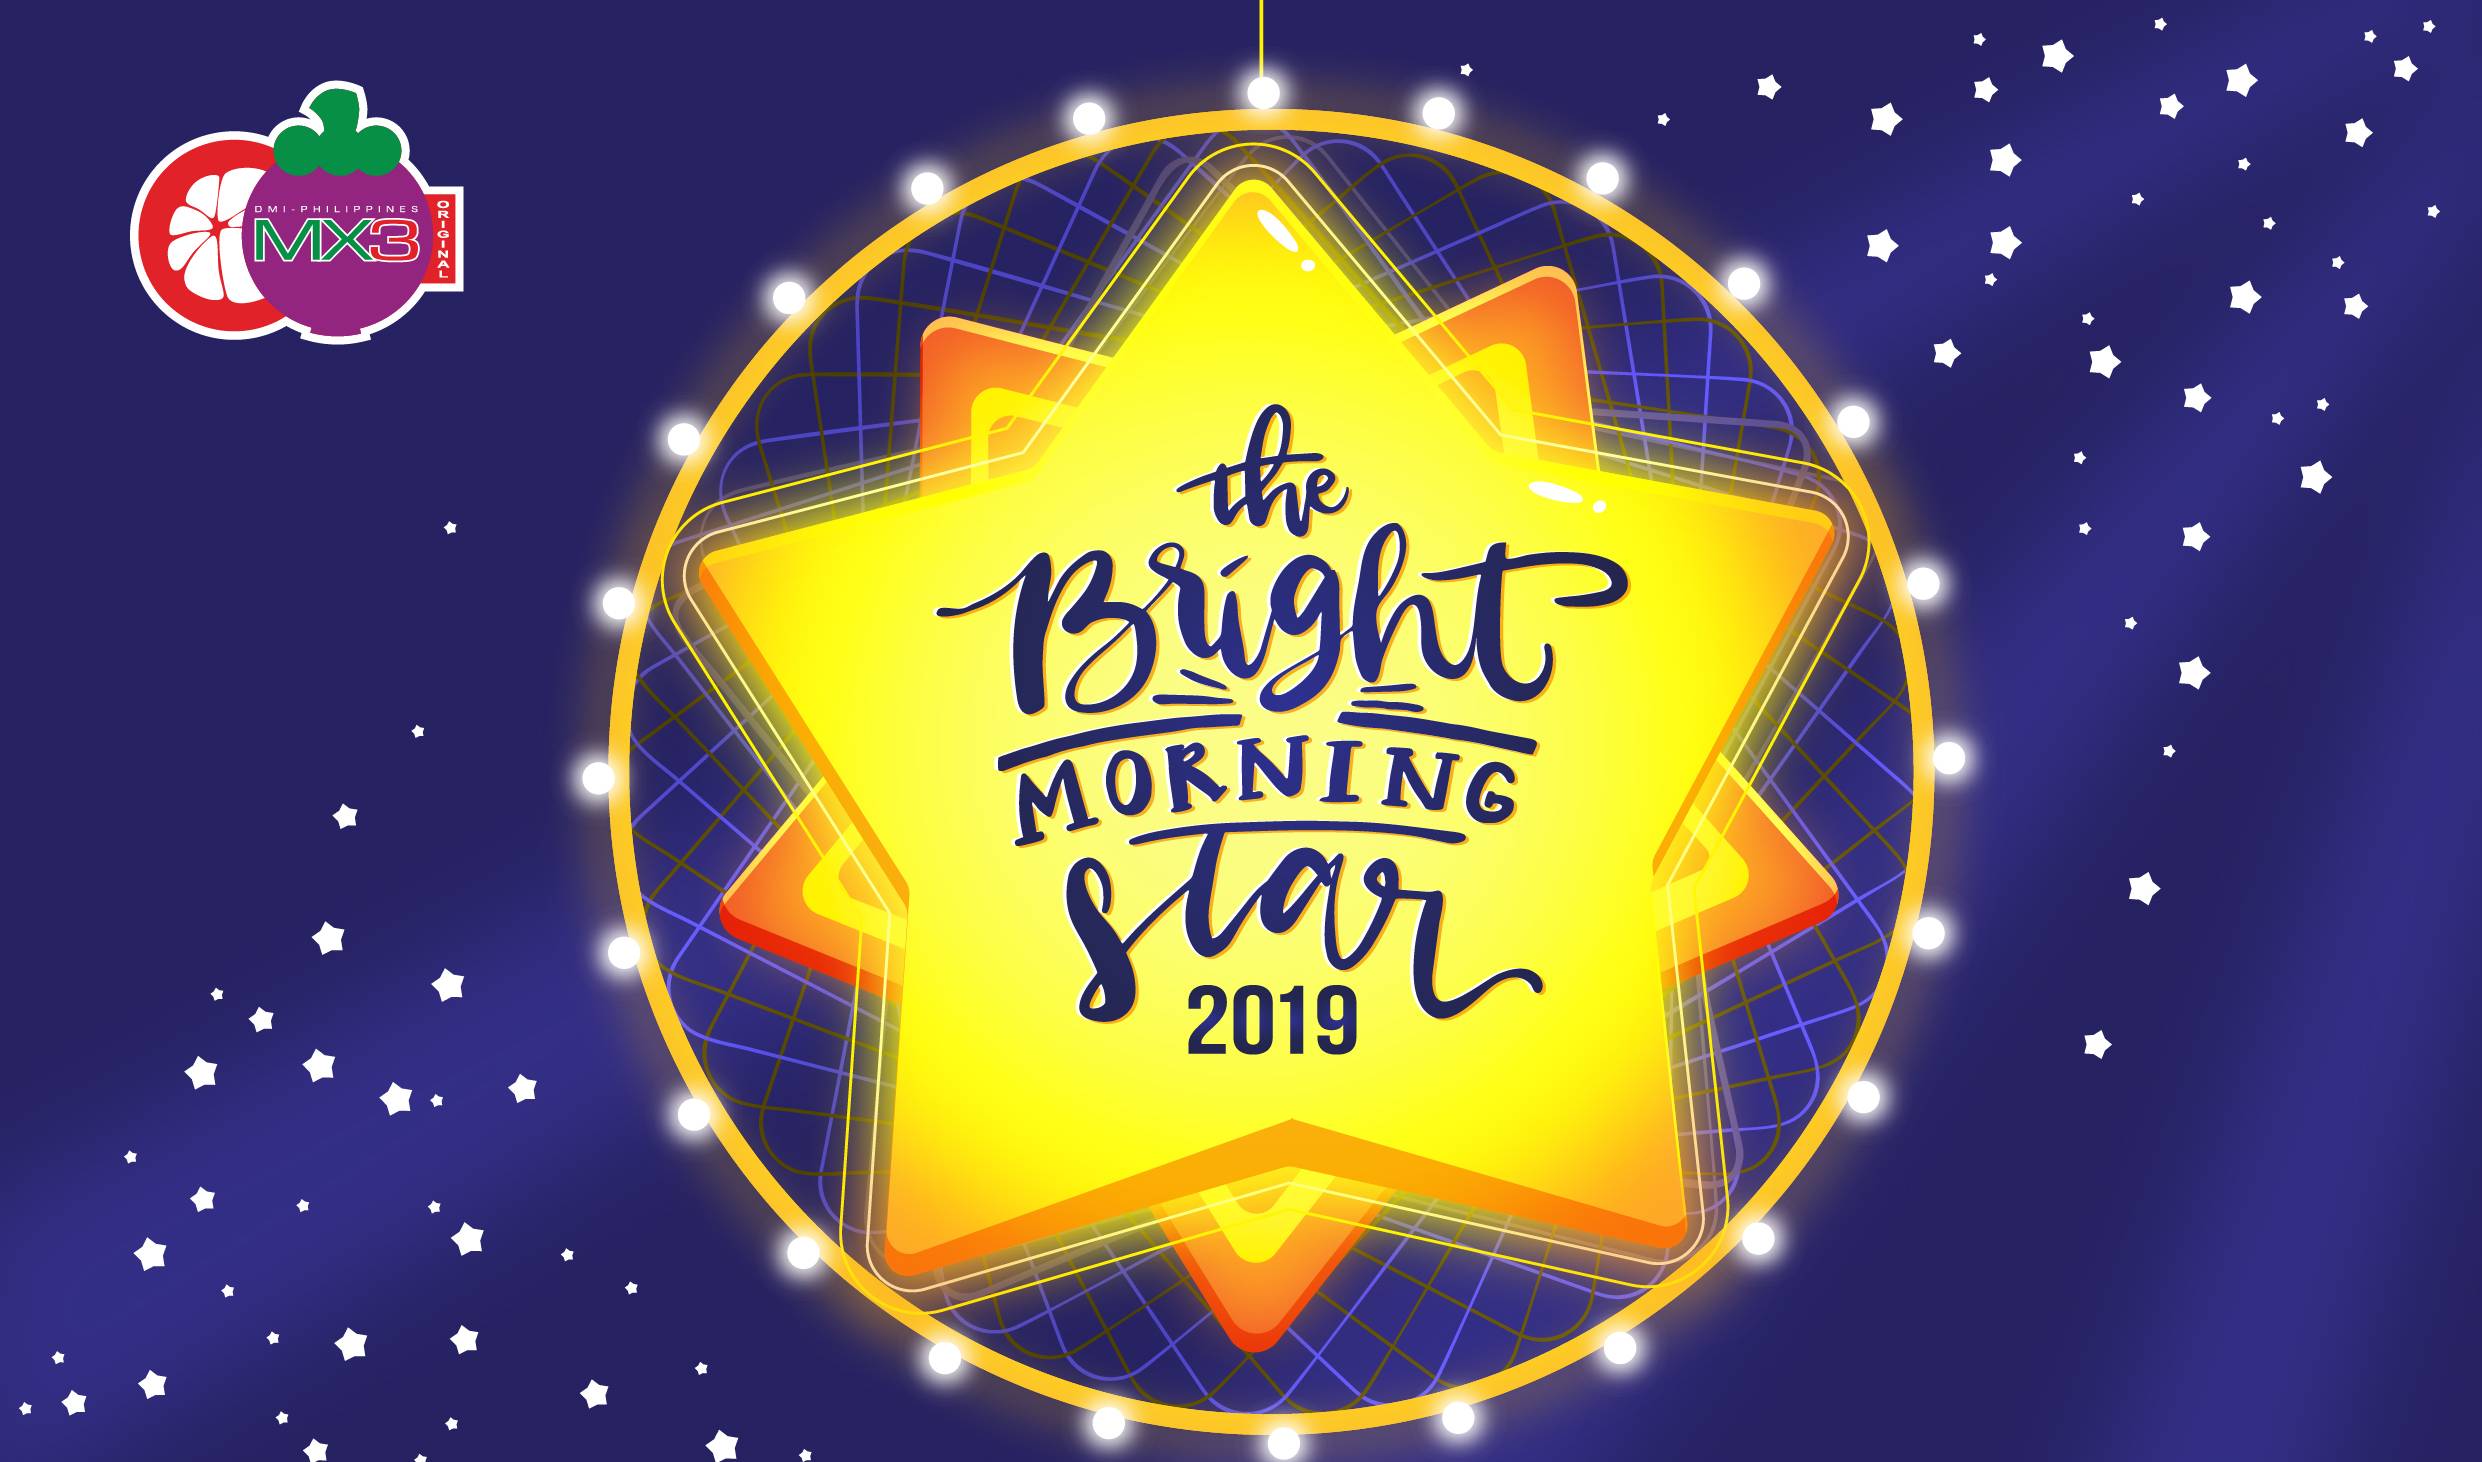 The Bright Morning Star 2019 Winners